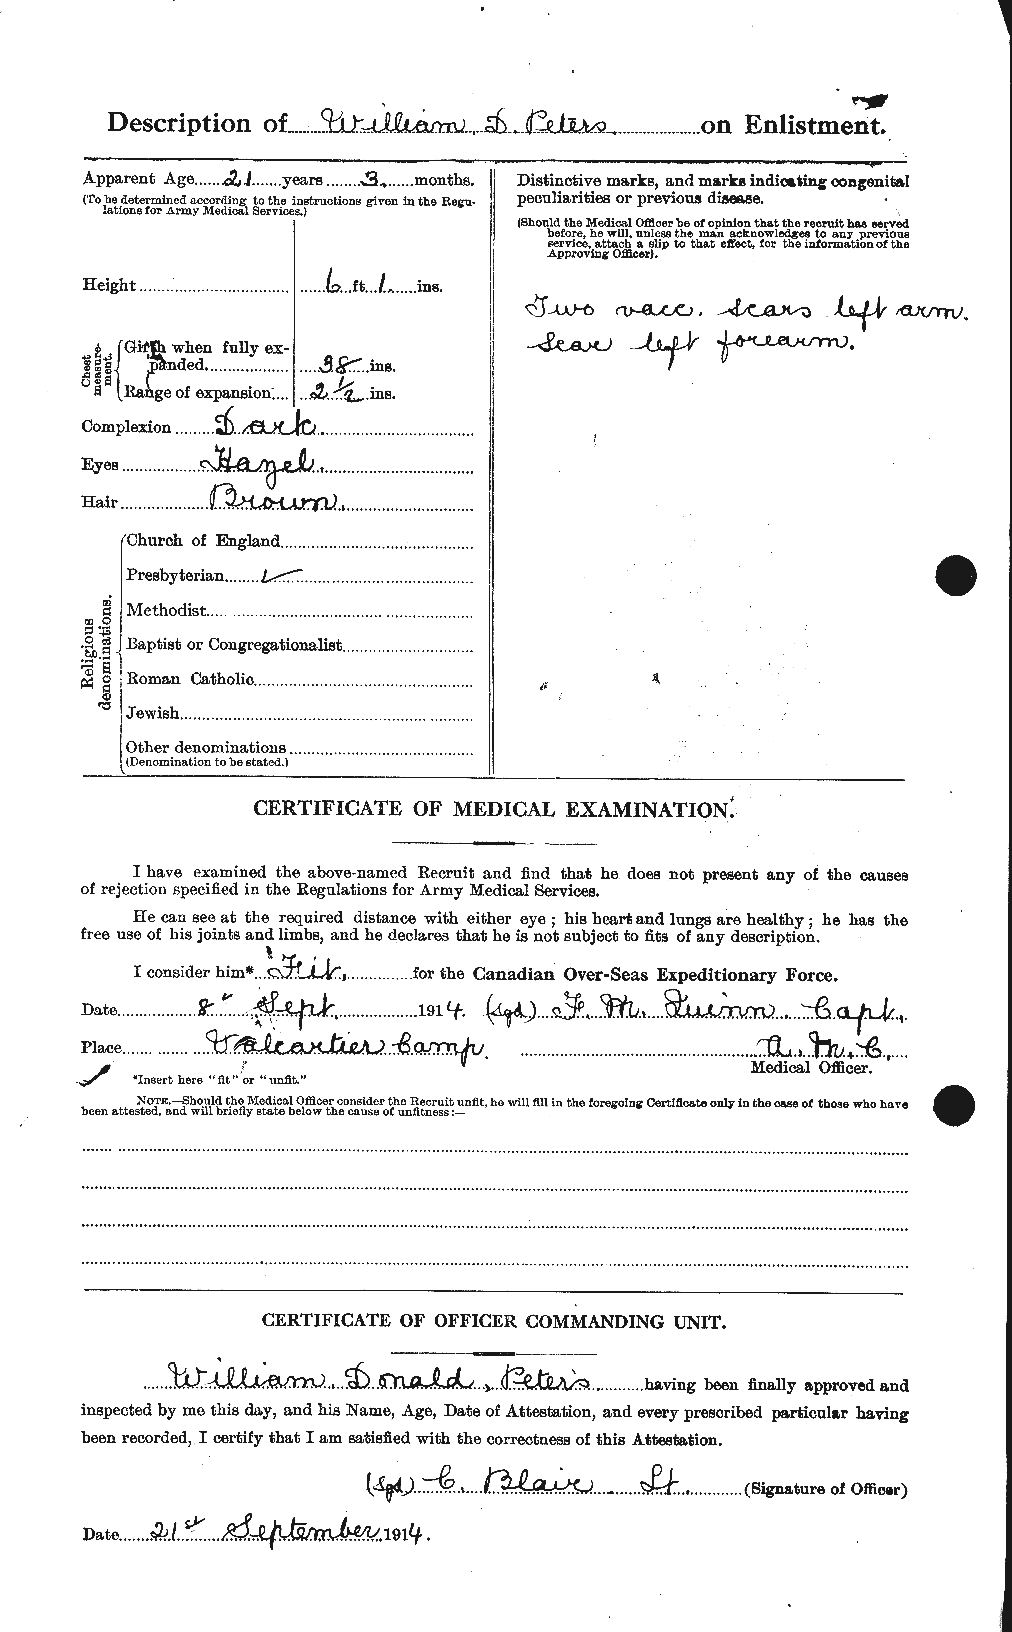 Personnel Records of the First World War - CEF 575653b